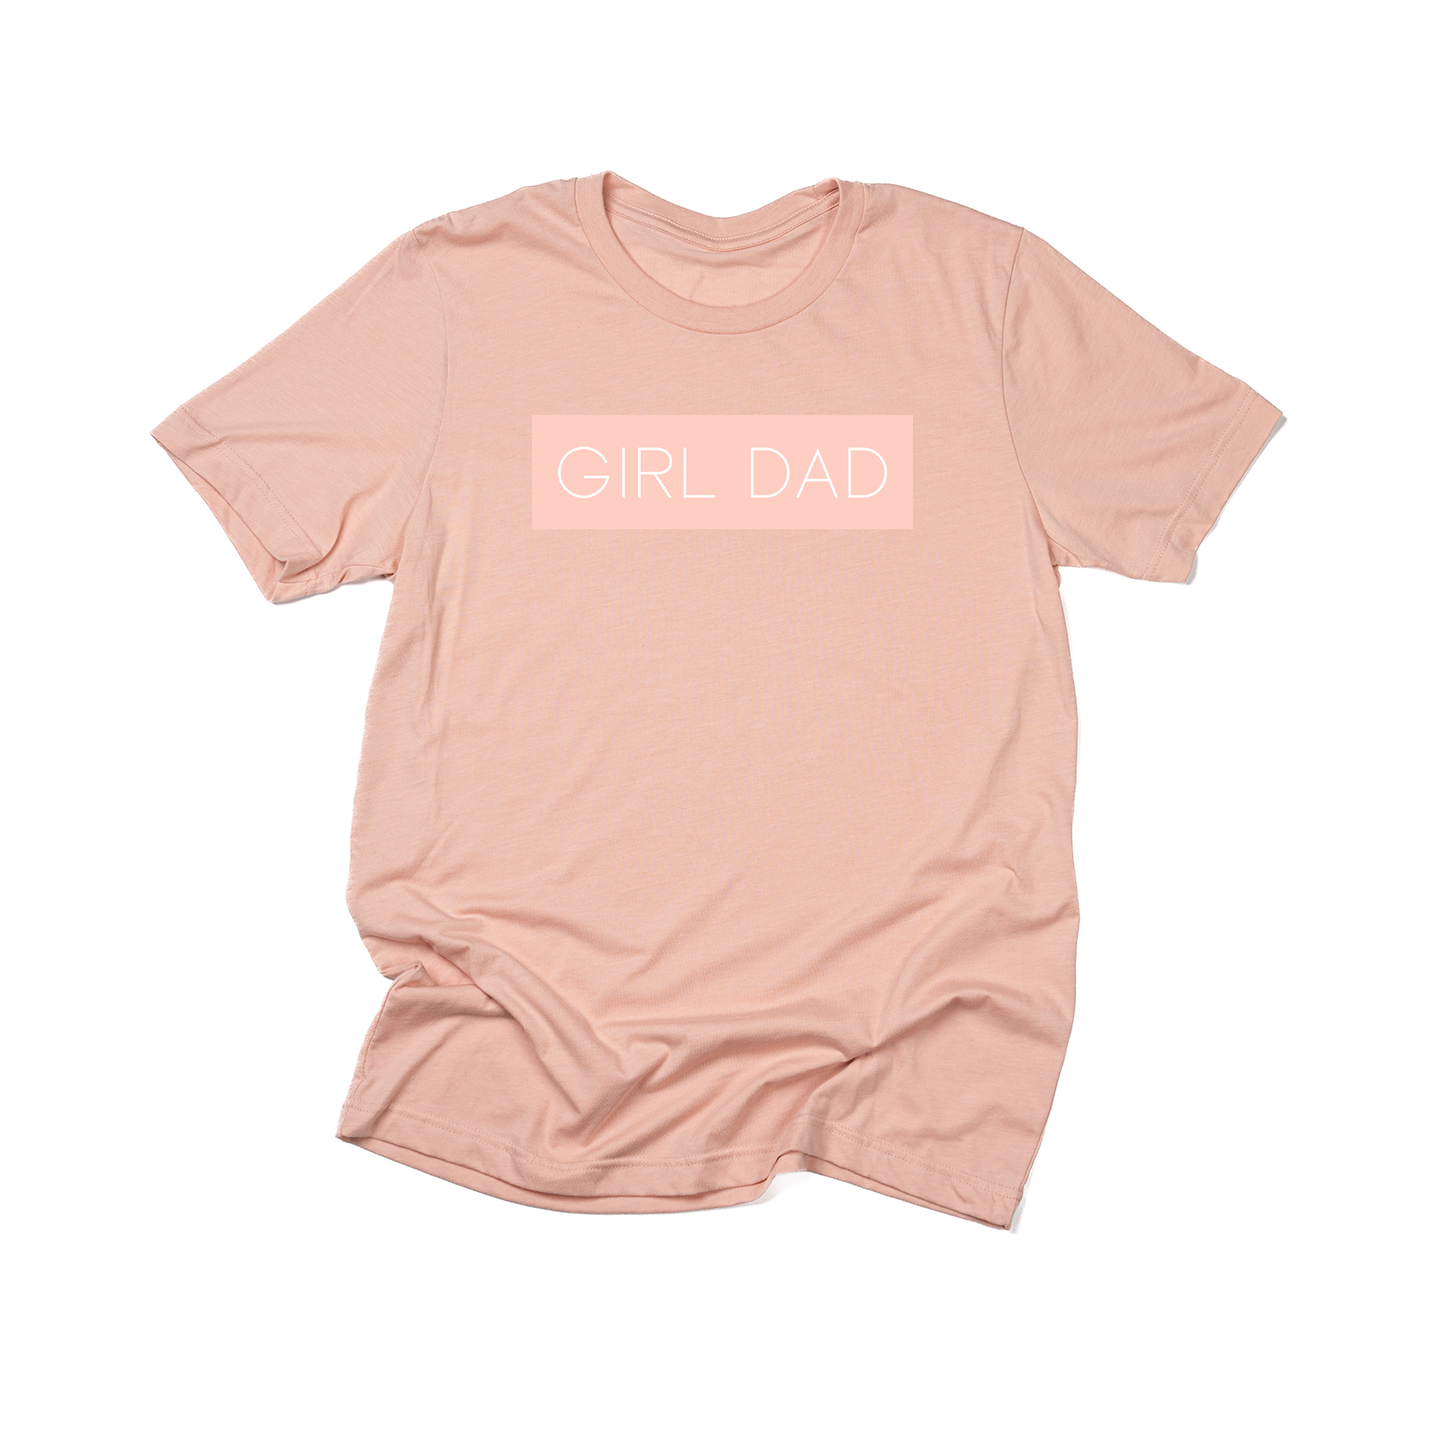 Girl Dad® (Boxed Collection, Ballerina Pink Box/White Text) - Tee (Peach)